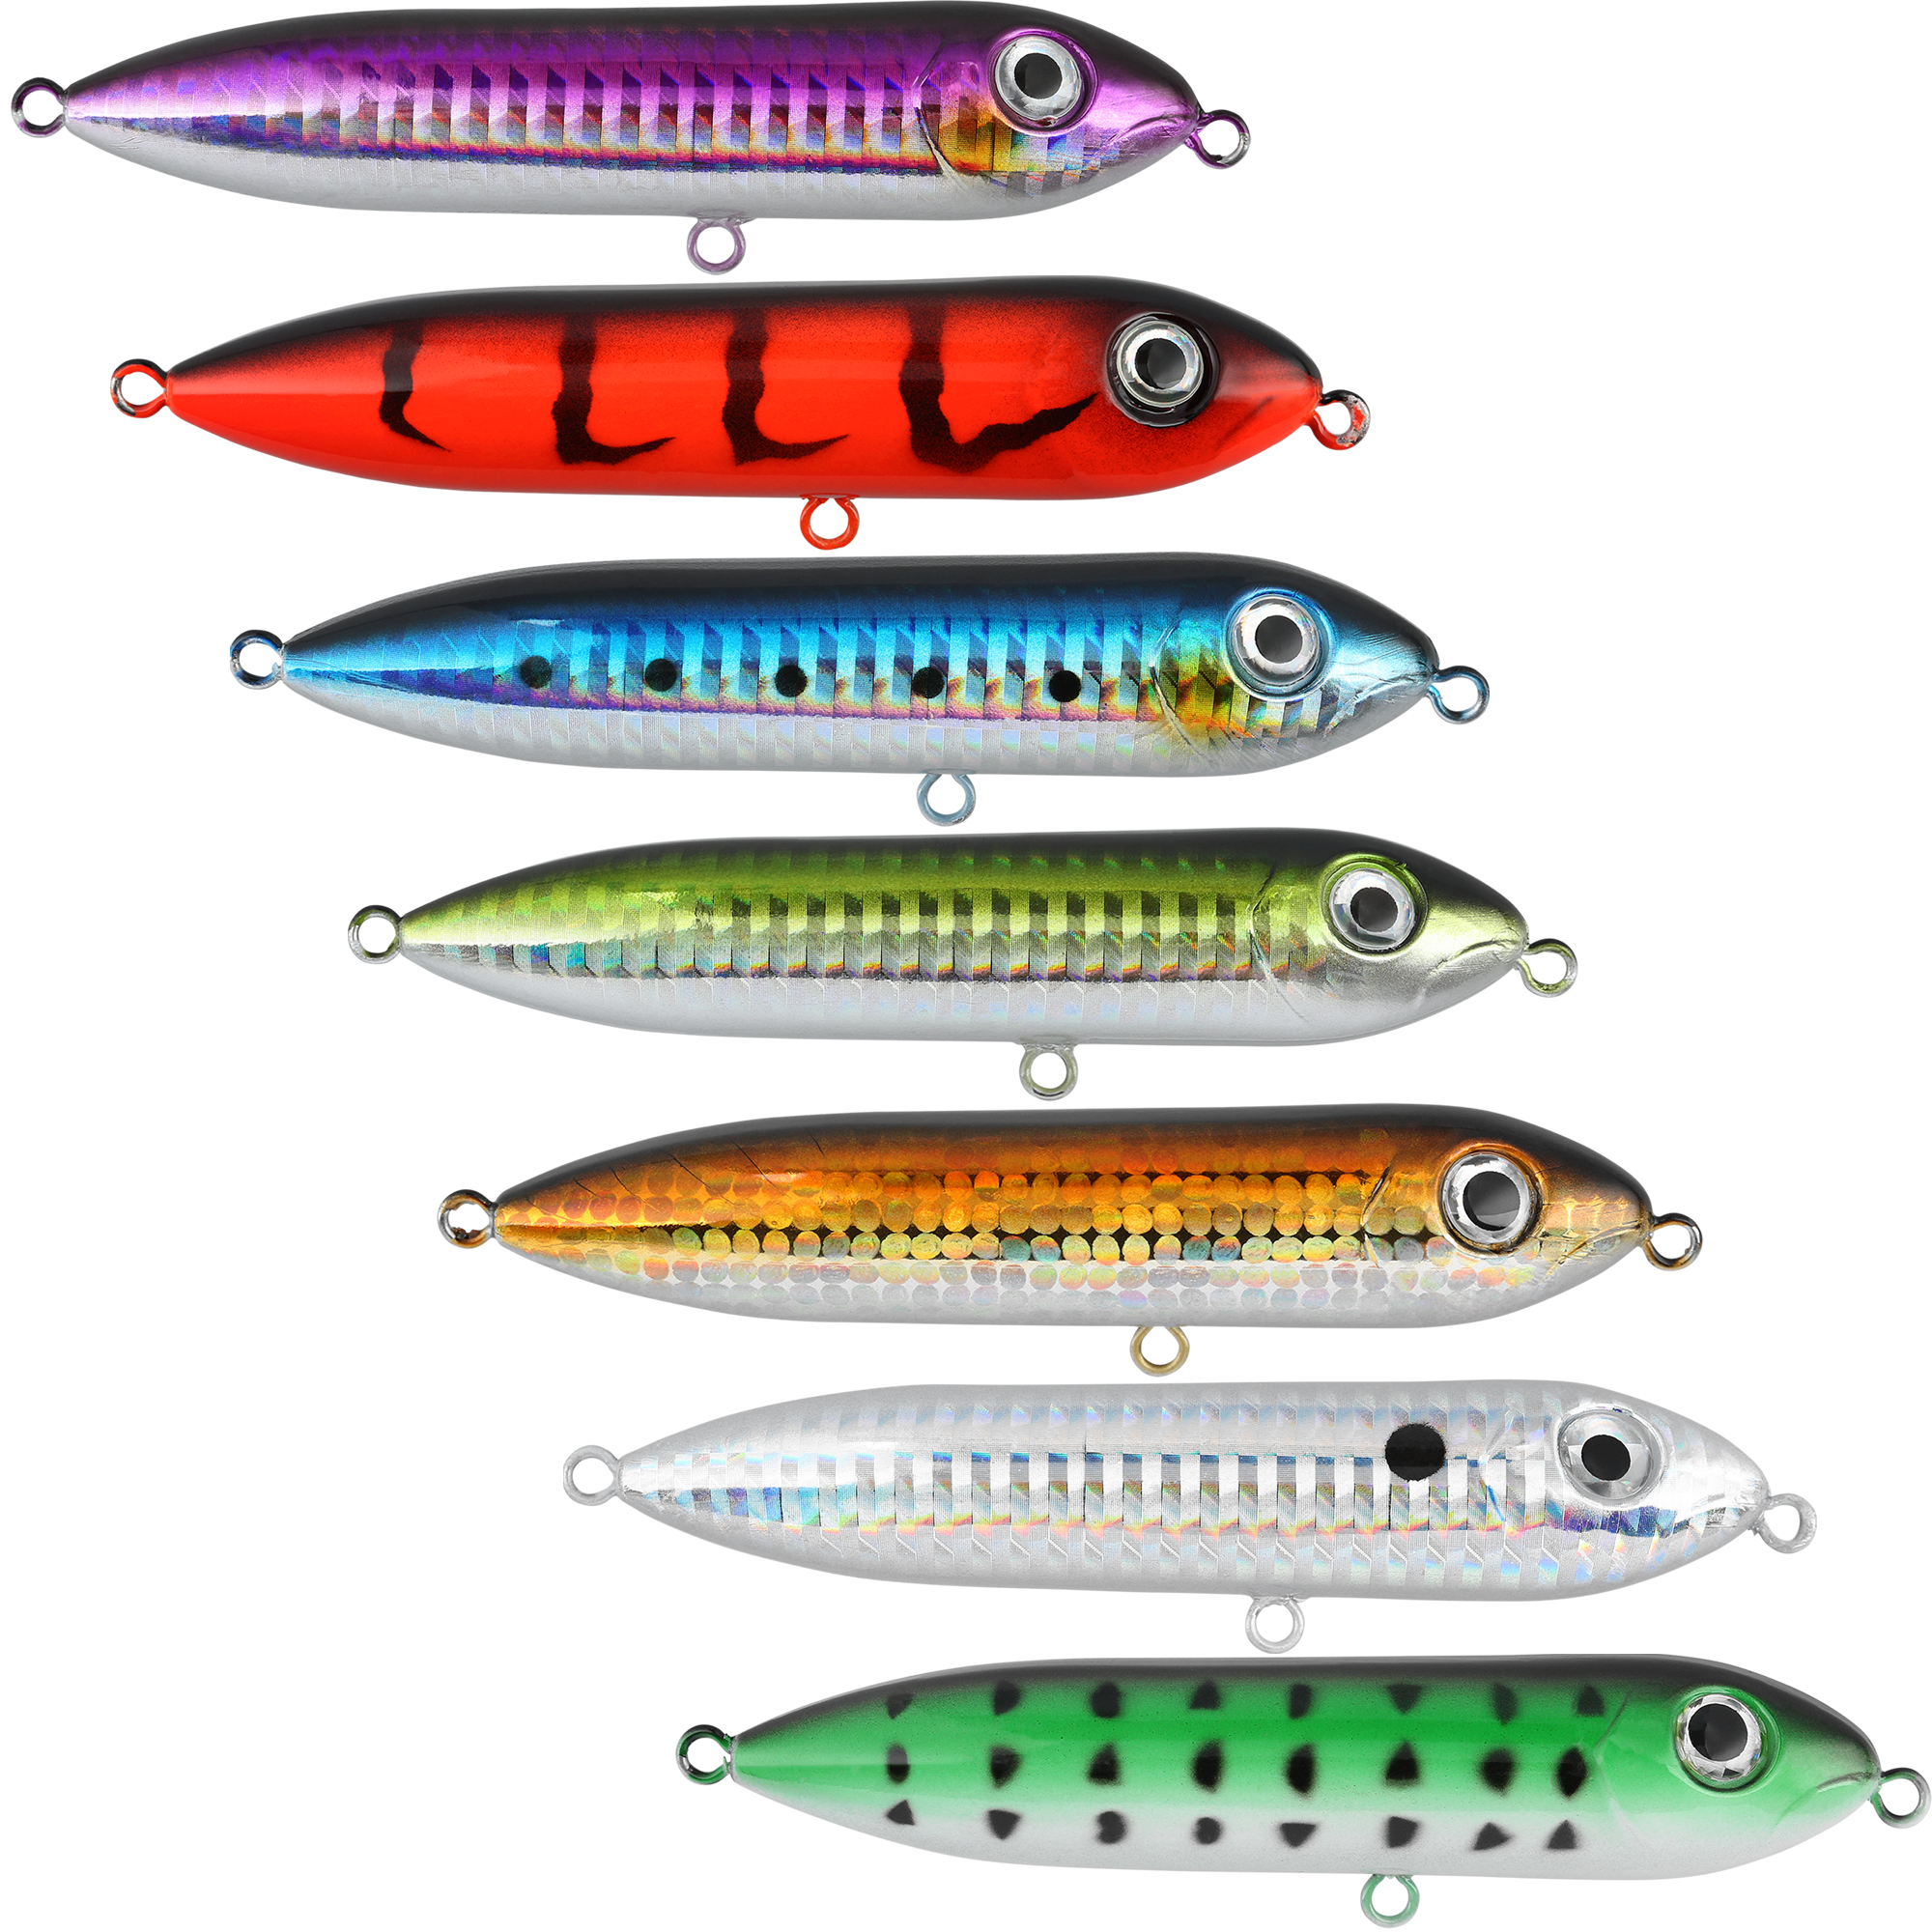 Catfish Sumo Catfish Rattling Line Float Lure for Catfishing, Demon Dragon Style Peg for Santee Rig Fishing, 4 inch (3-Pack, Threadfin Shad)